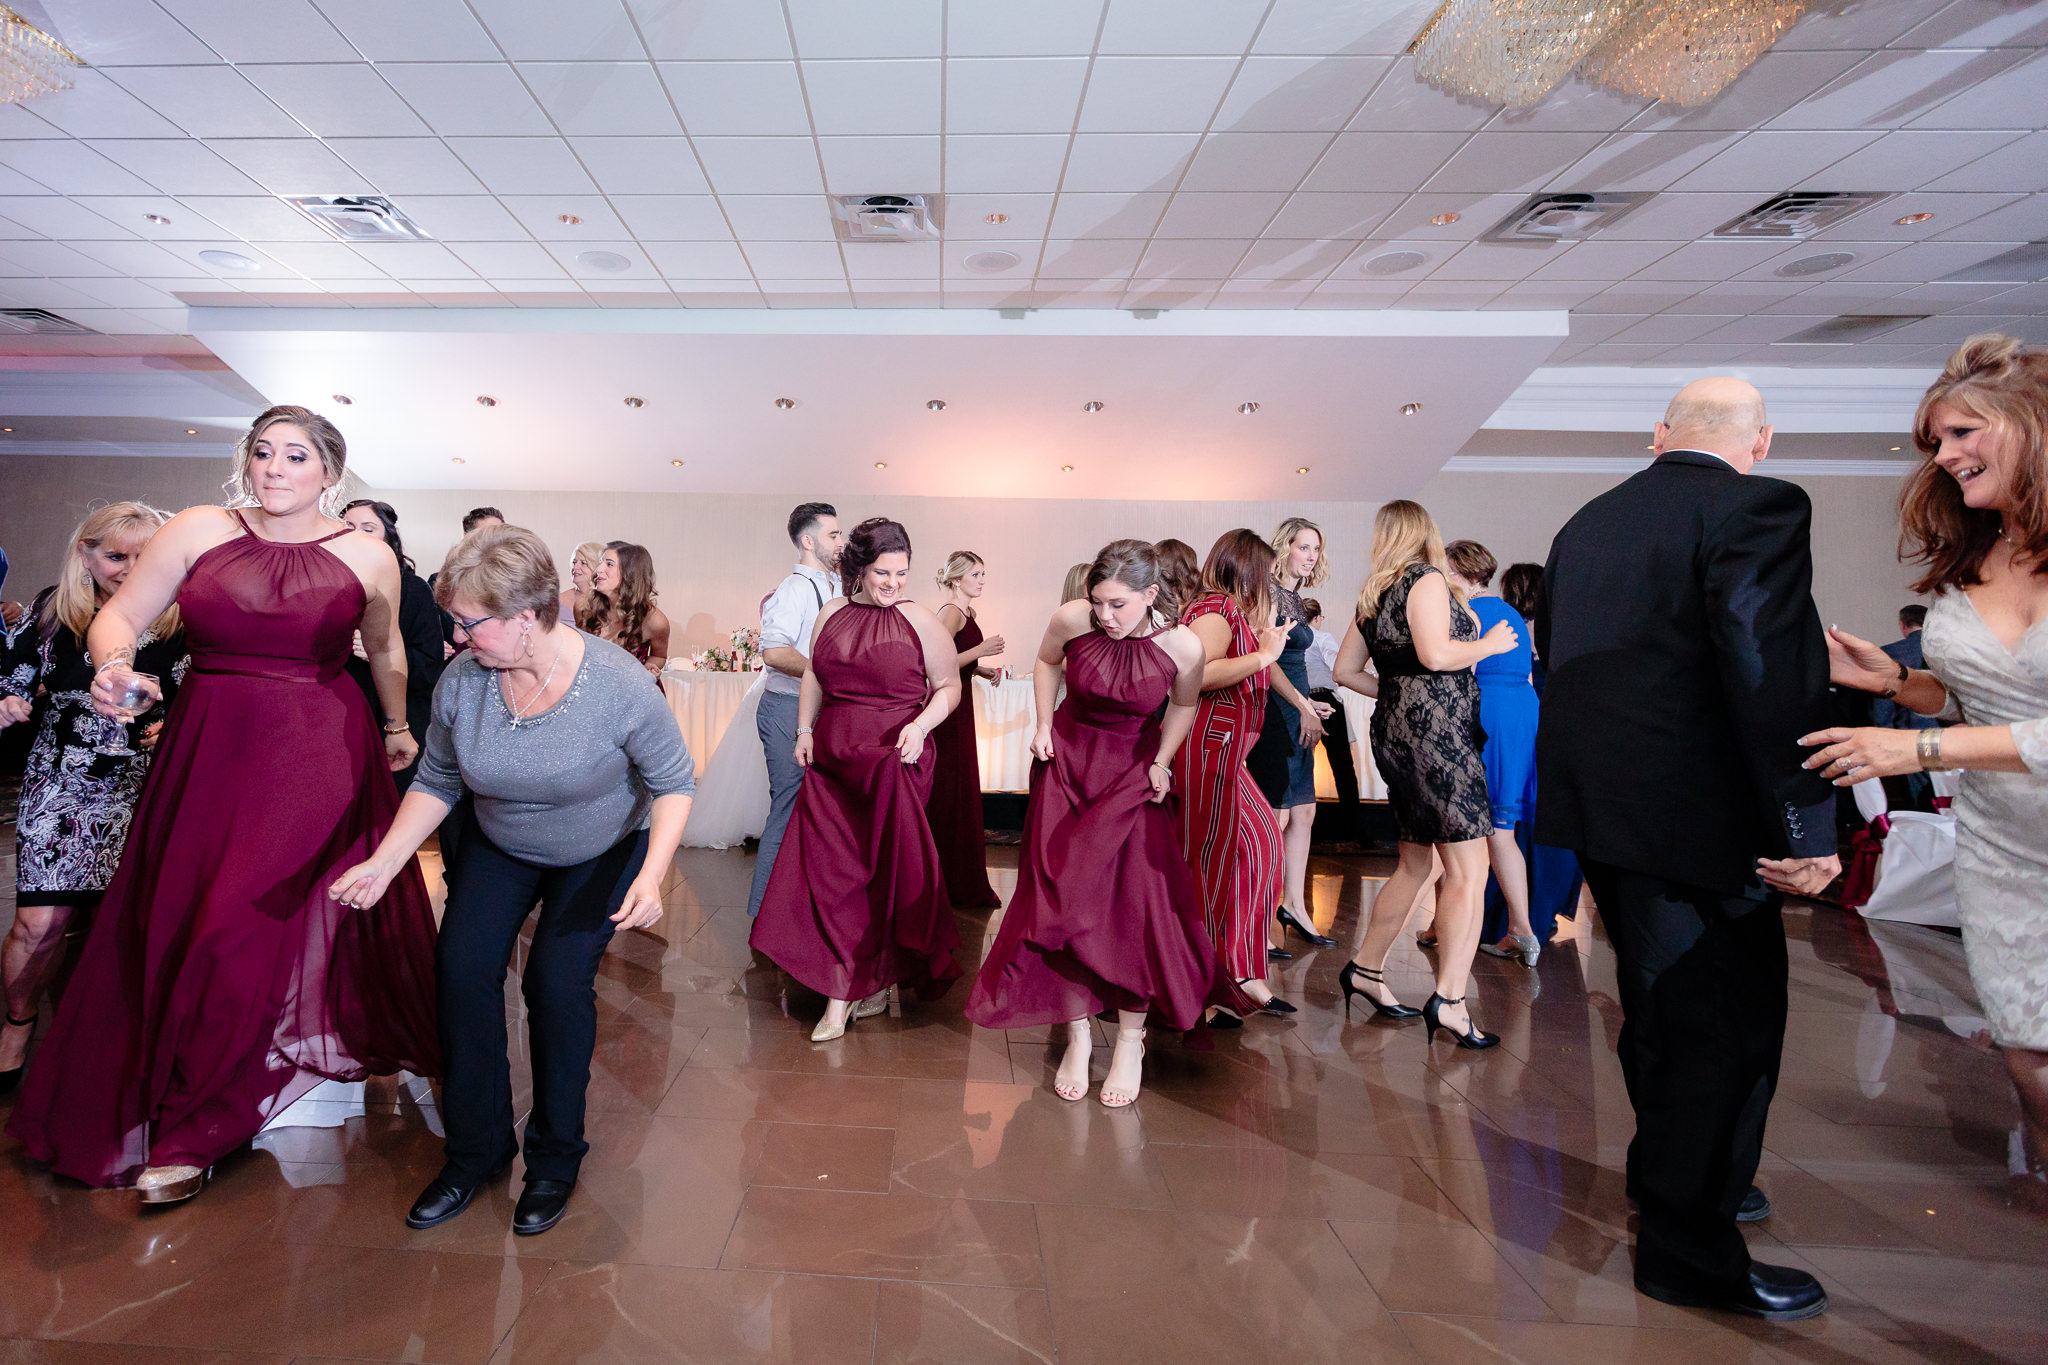 Wedding guests fill the dance floor at the Fez